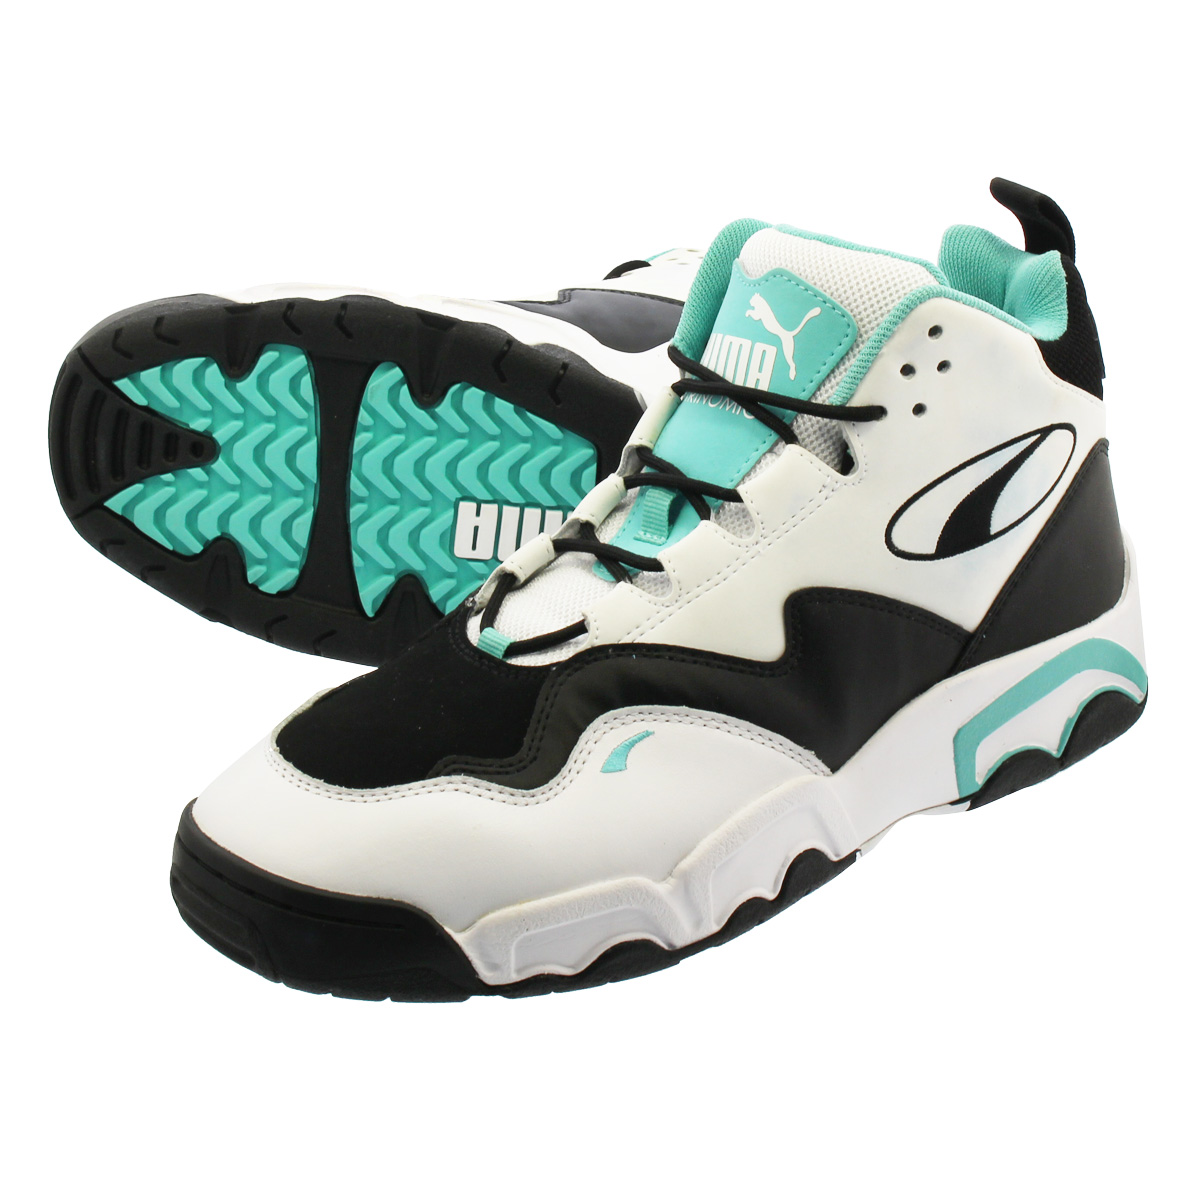 all turquoise pumas